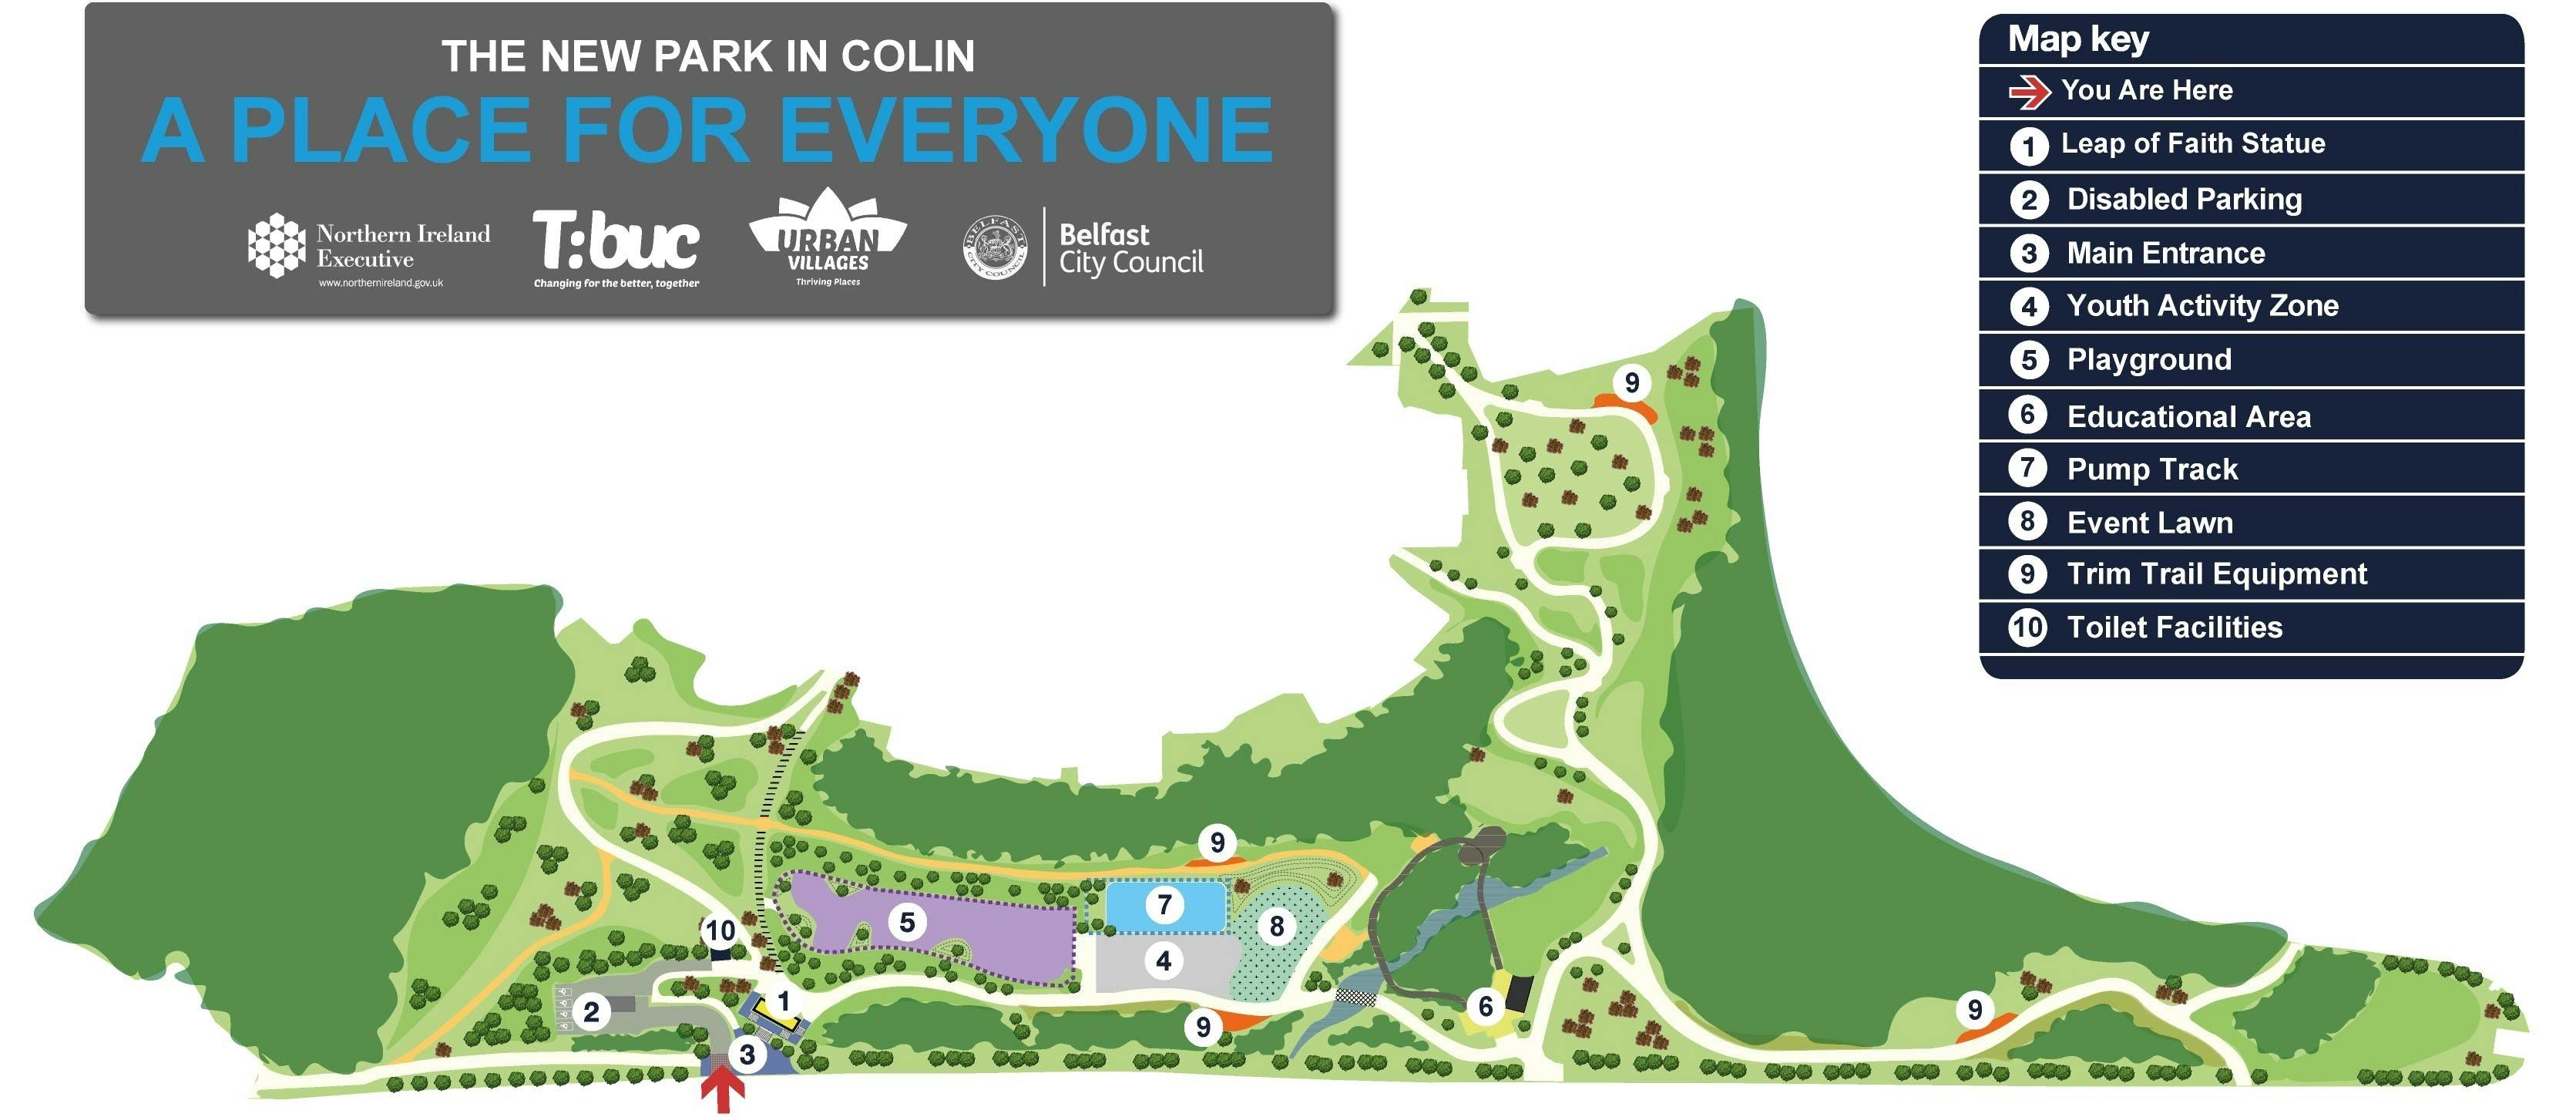 The new park at Colin:  A Place for Everyone with artist impression and map of the new park and partner logos 